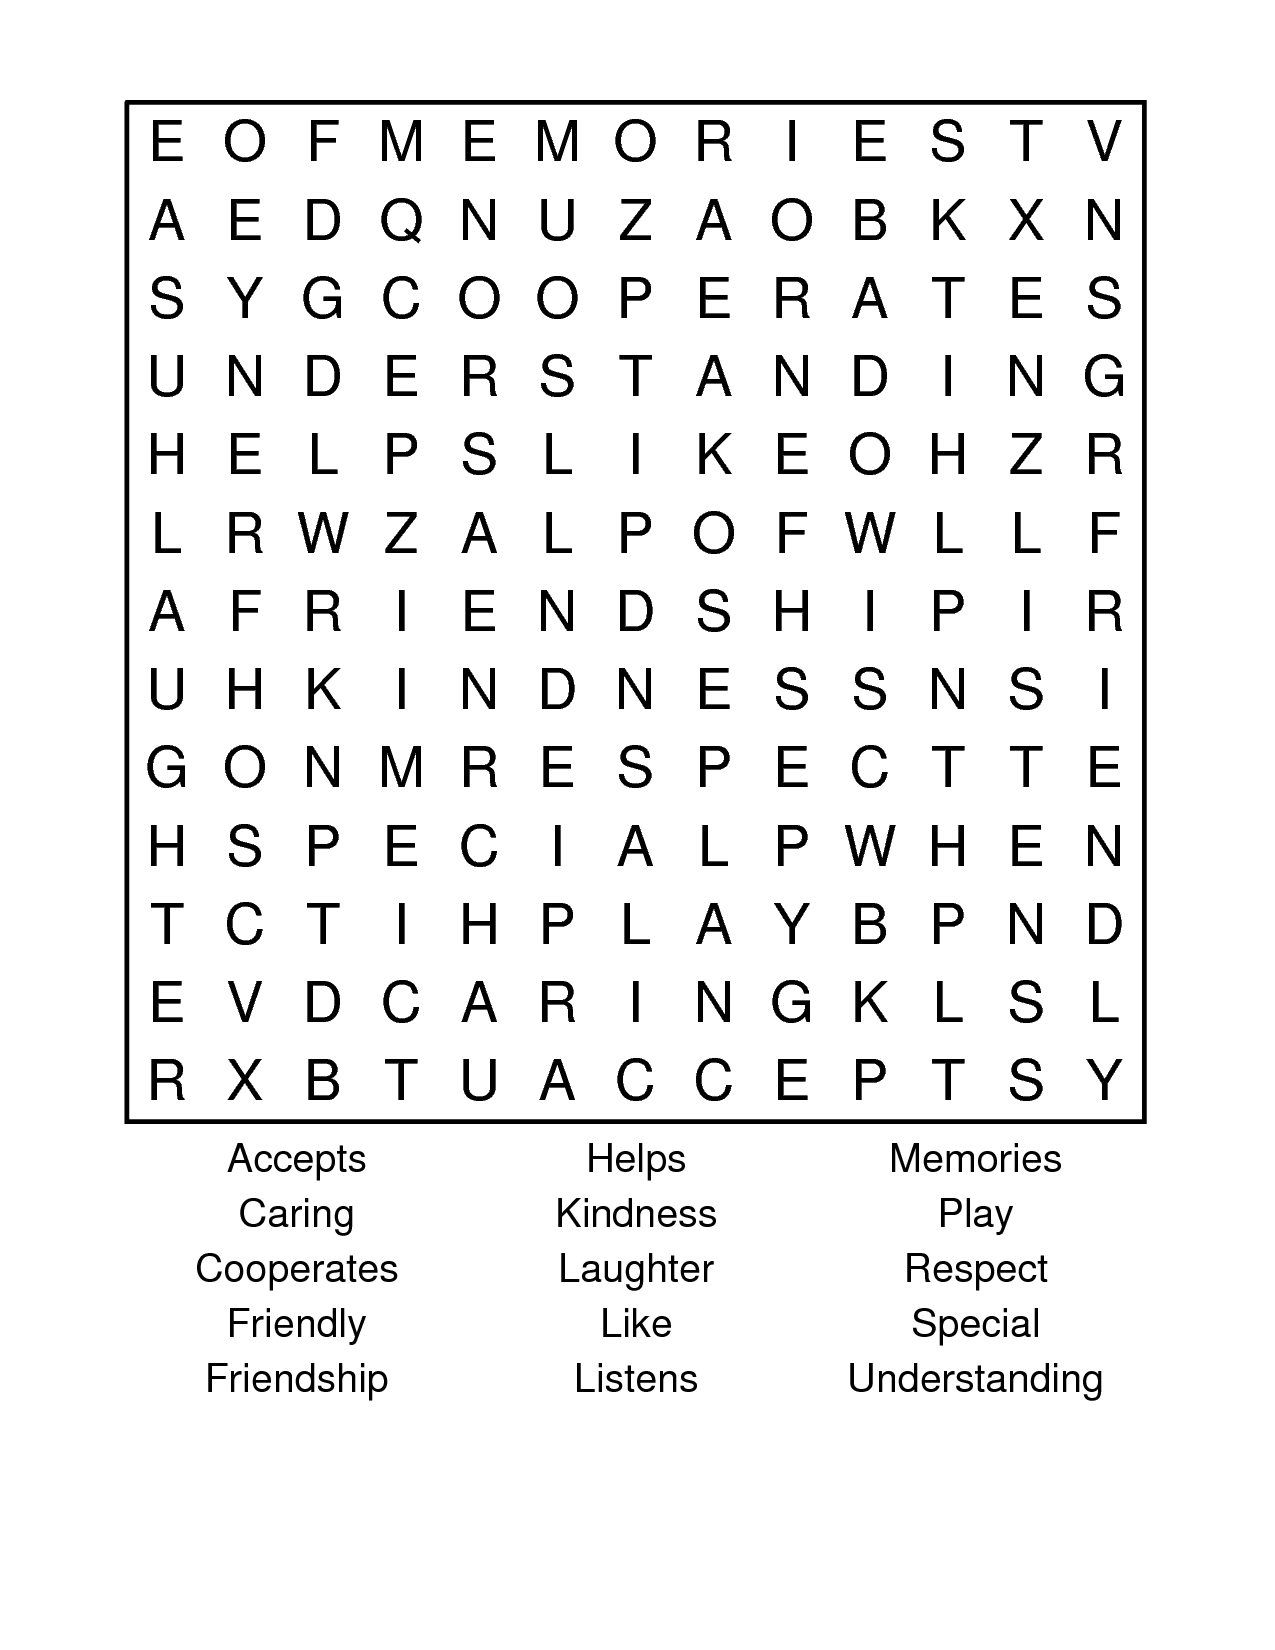 Friendship Word Search Puzzle